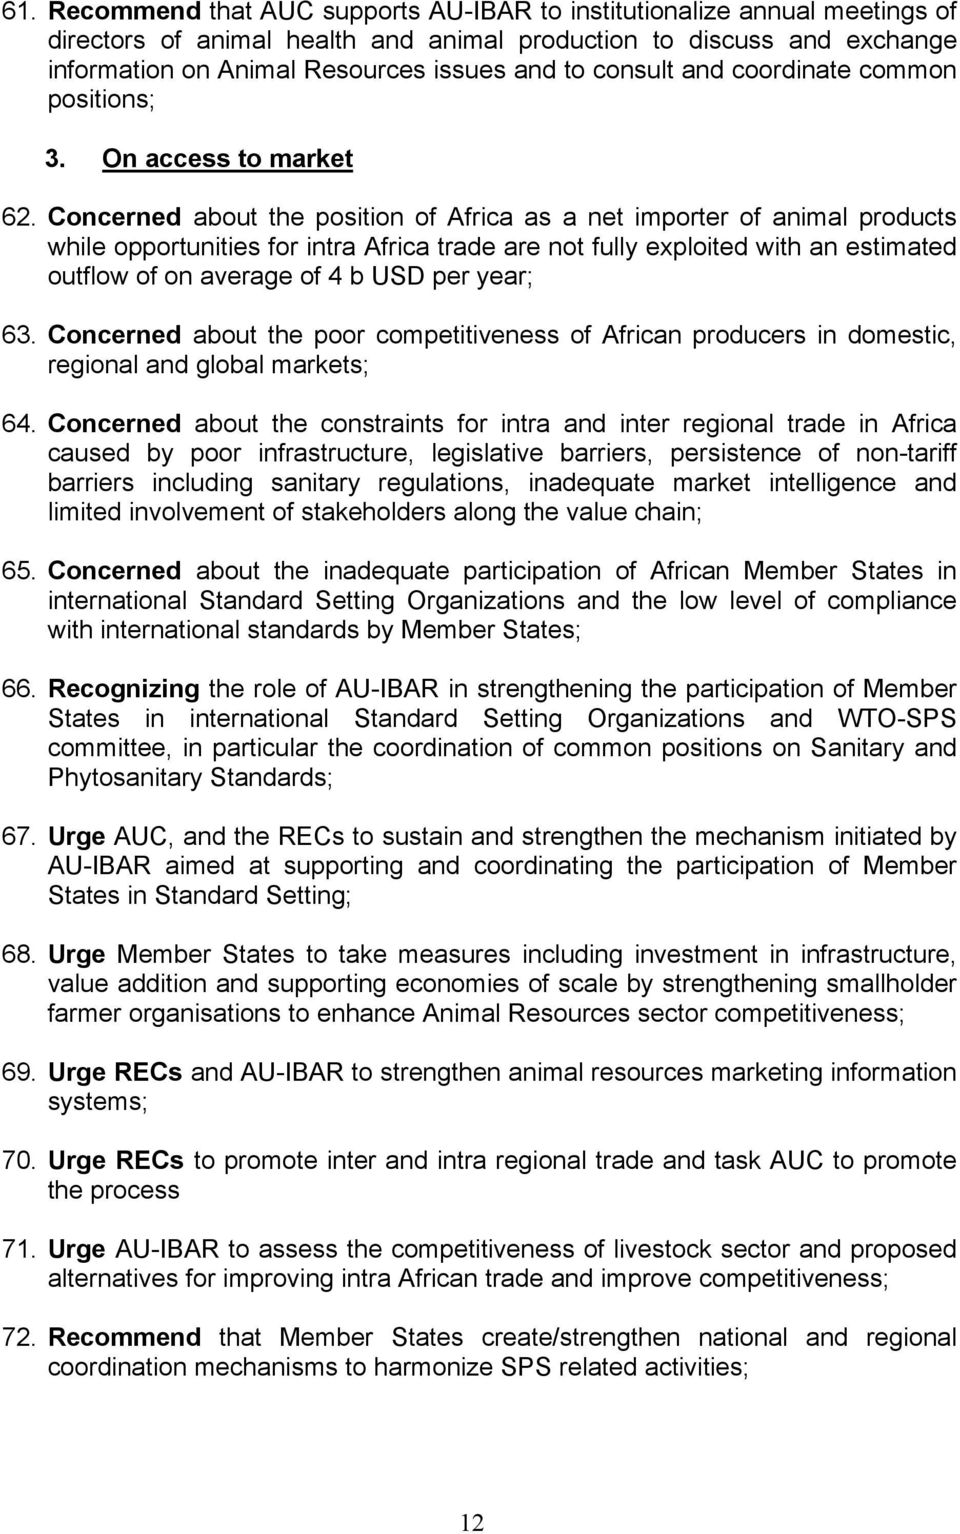 Concerned about the position of Africa as a net importer of animal products while opportunities for intra Africa trade are not fully exploited with an estimated outflow of on average of 4 b USD per